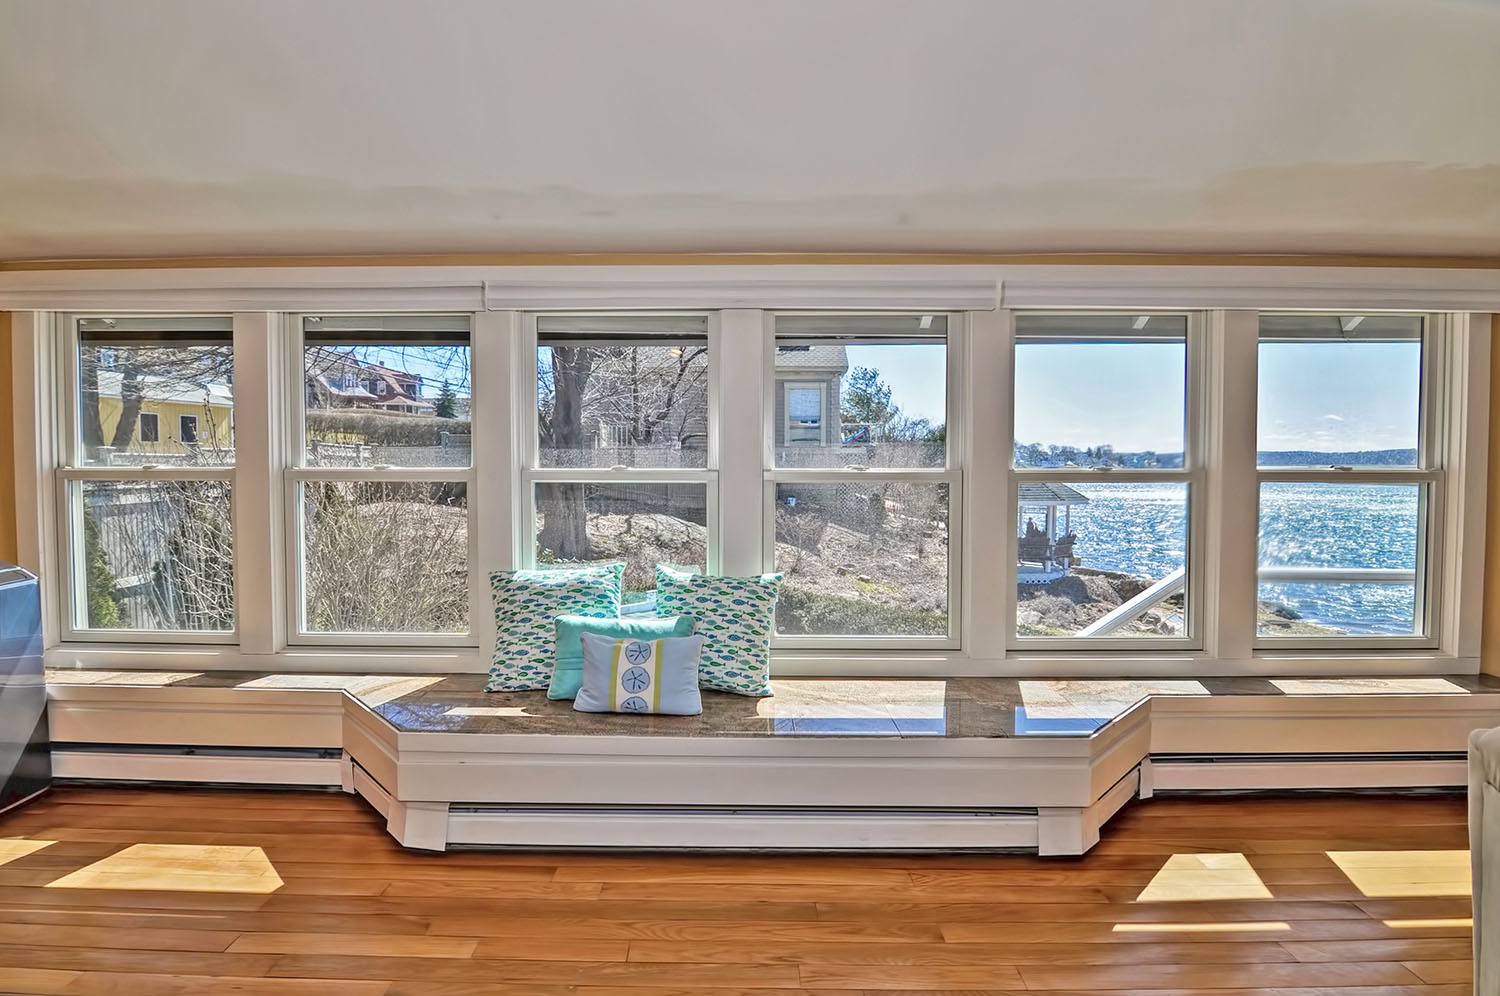 Cozy up to the view with this oversized window seat.